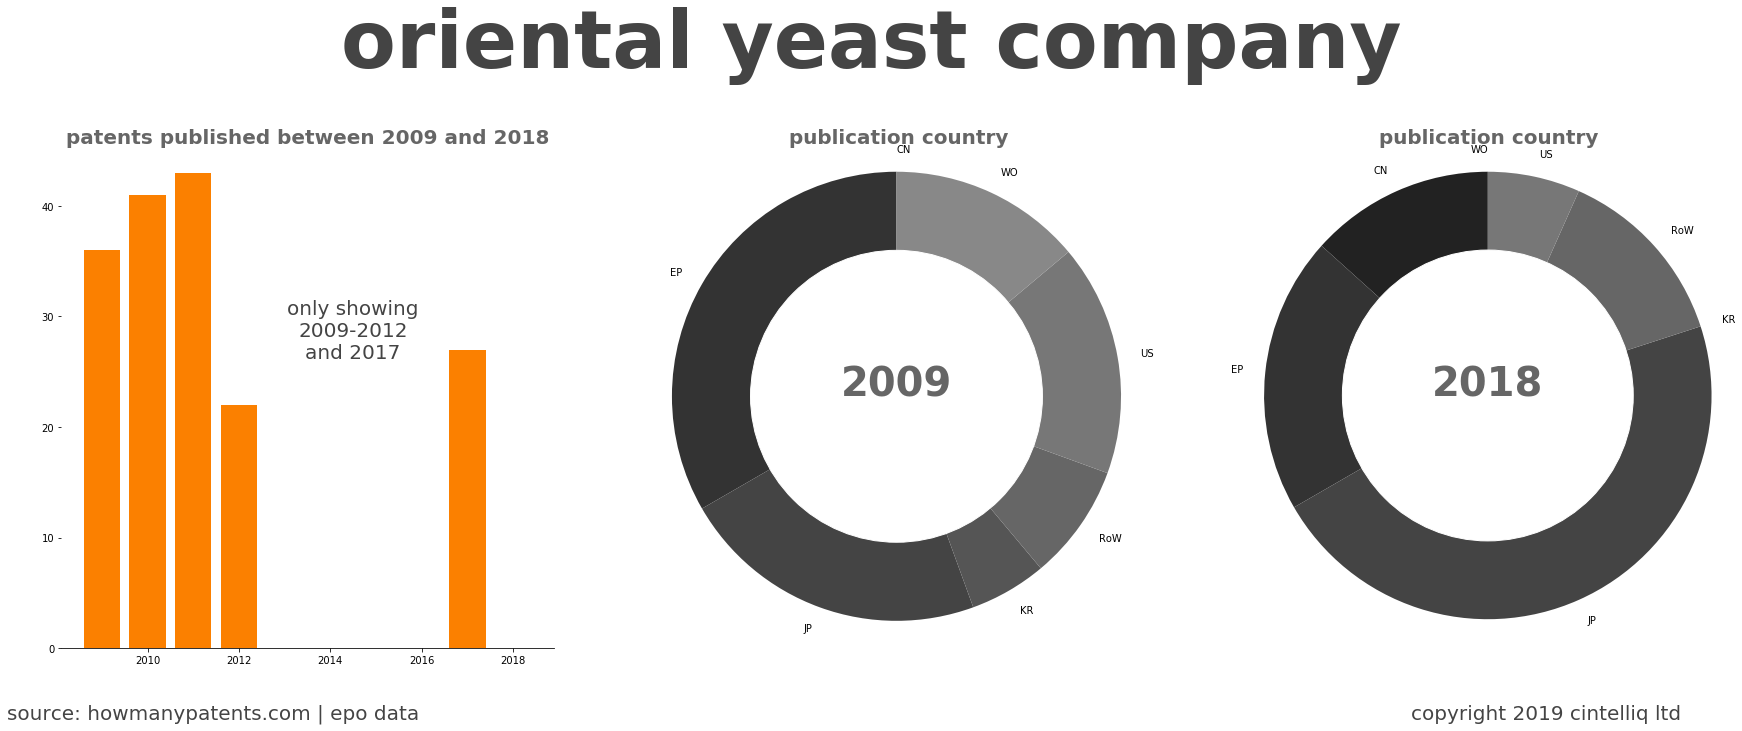 summary of patents for Oriental Yeast Company